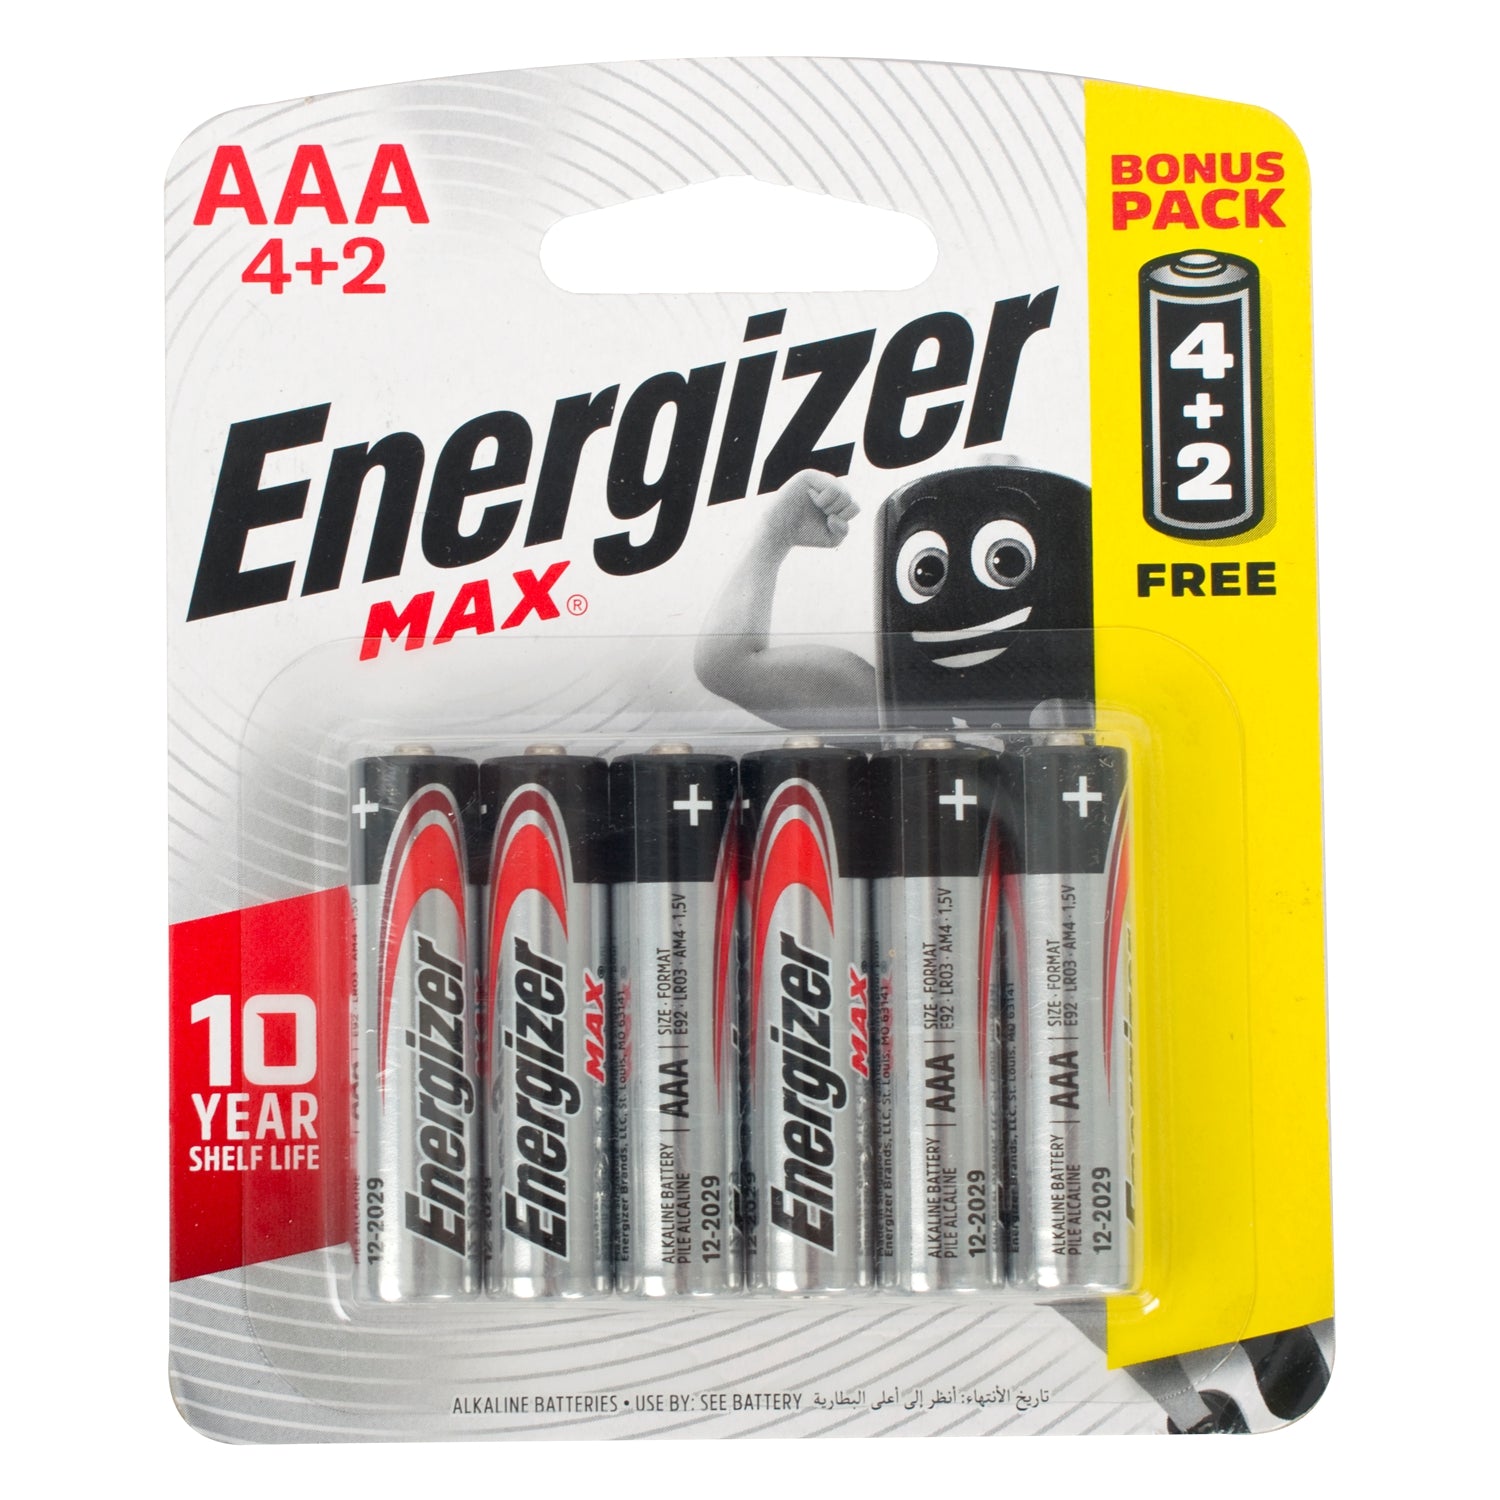 Energizer max aaa - 6pack 4+2 free